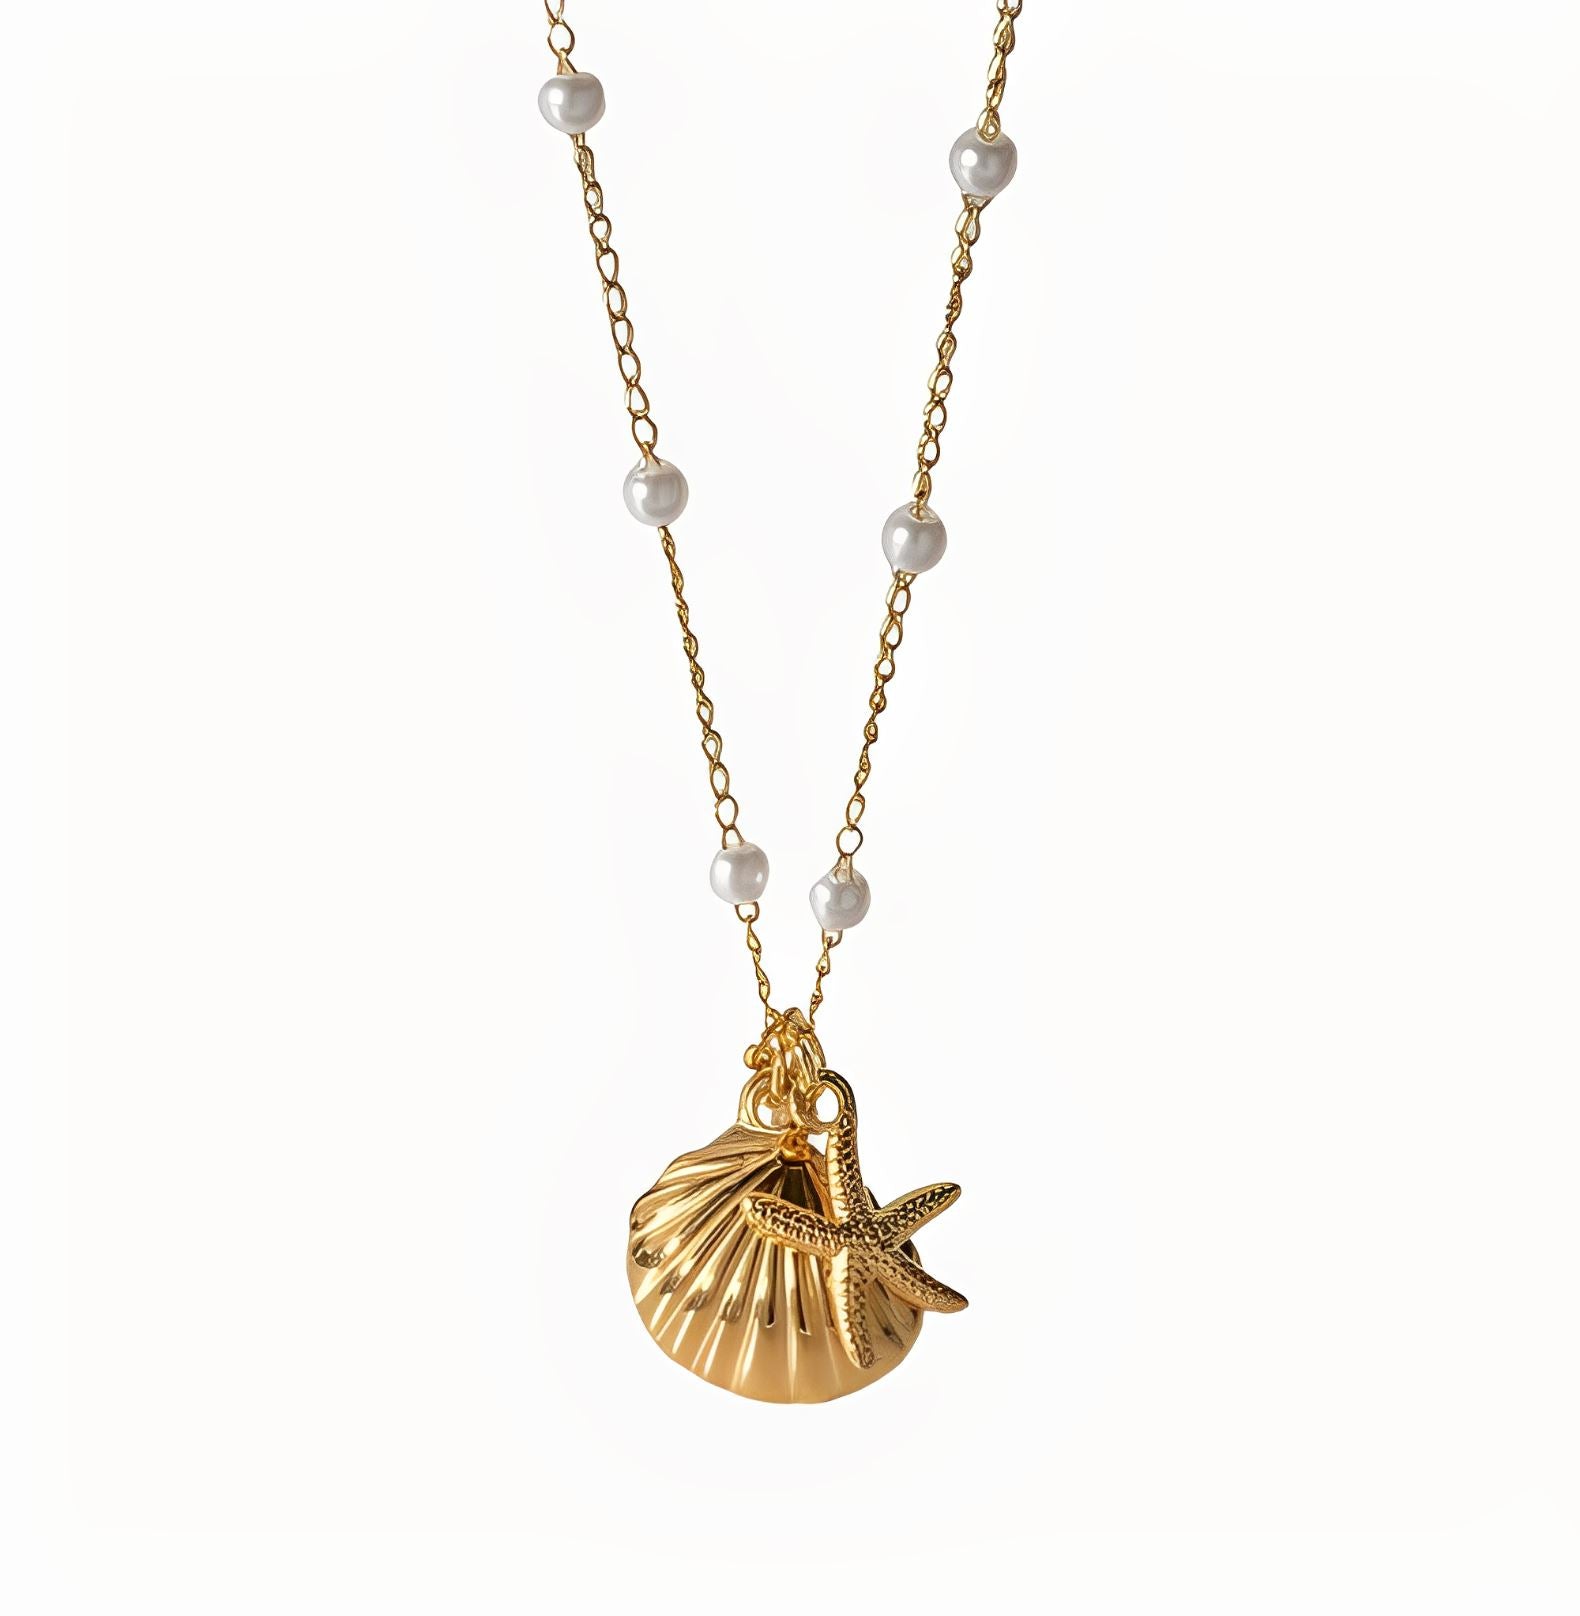 SHELL & STAR PENDANT NECKLACE neck Yubama Jewelry Online Store - The Elegant Designs of Gold and Silver ! 